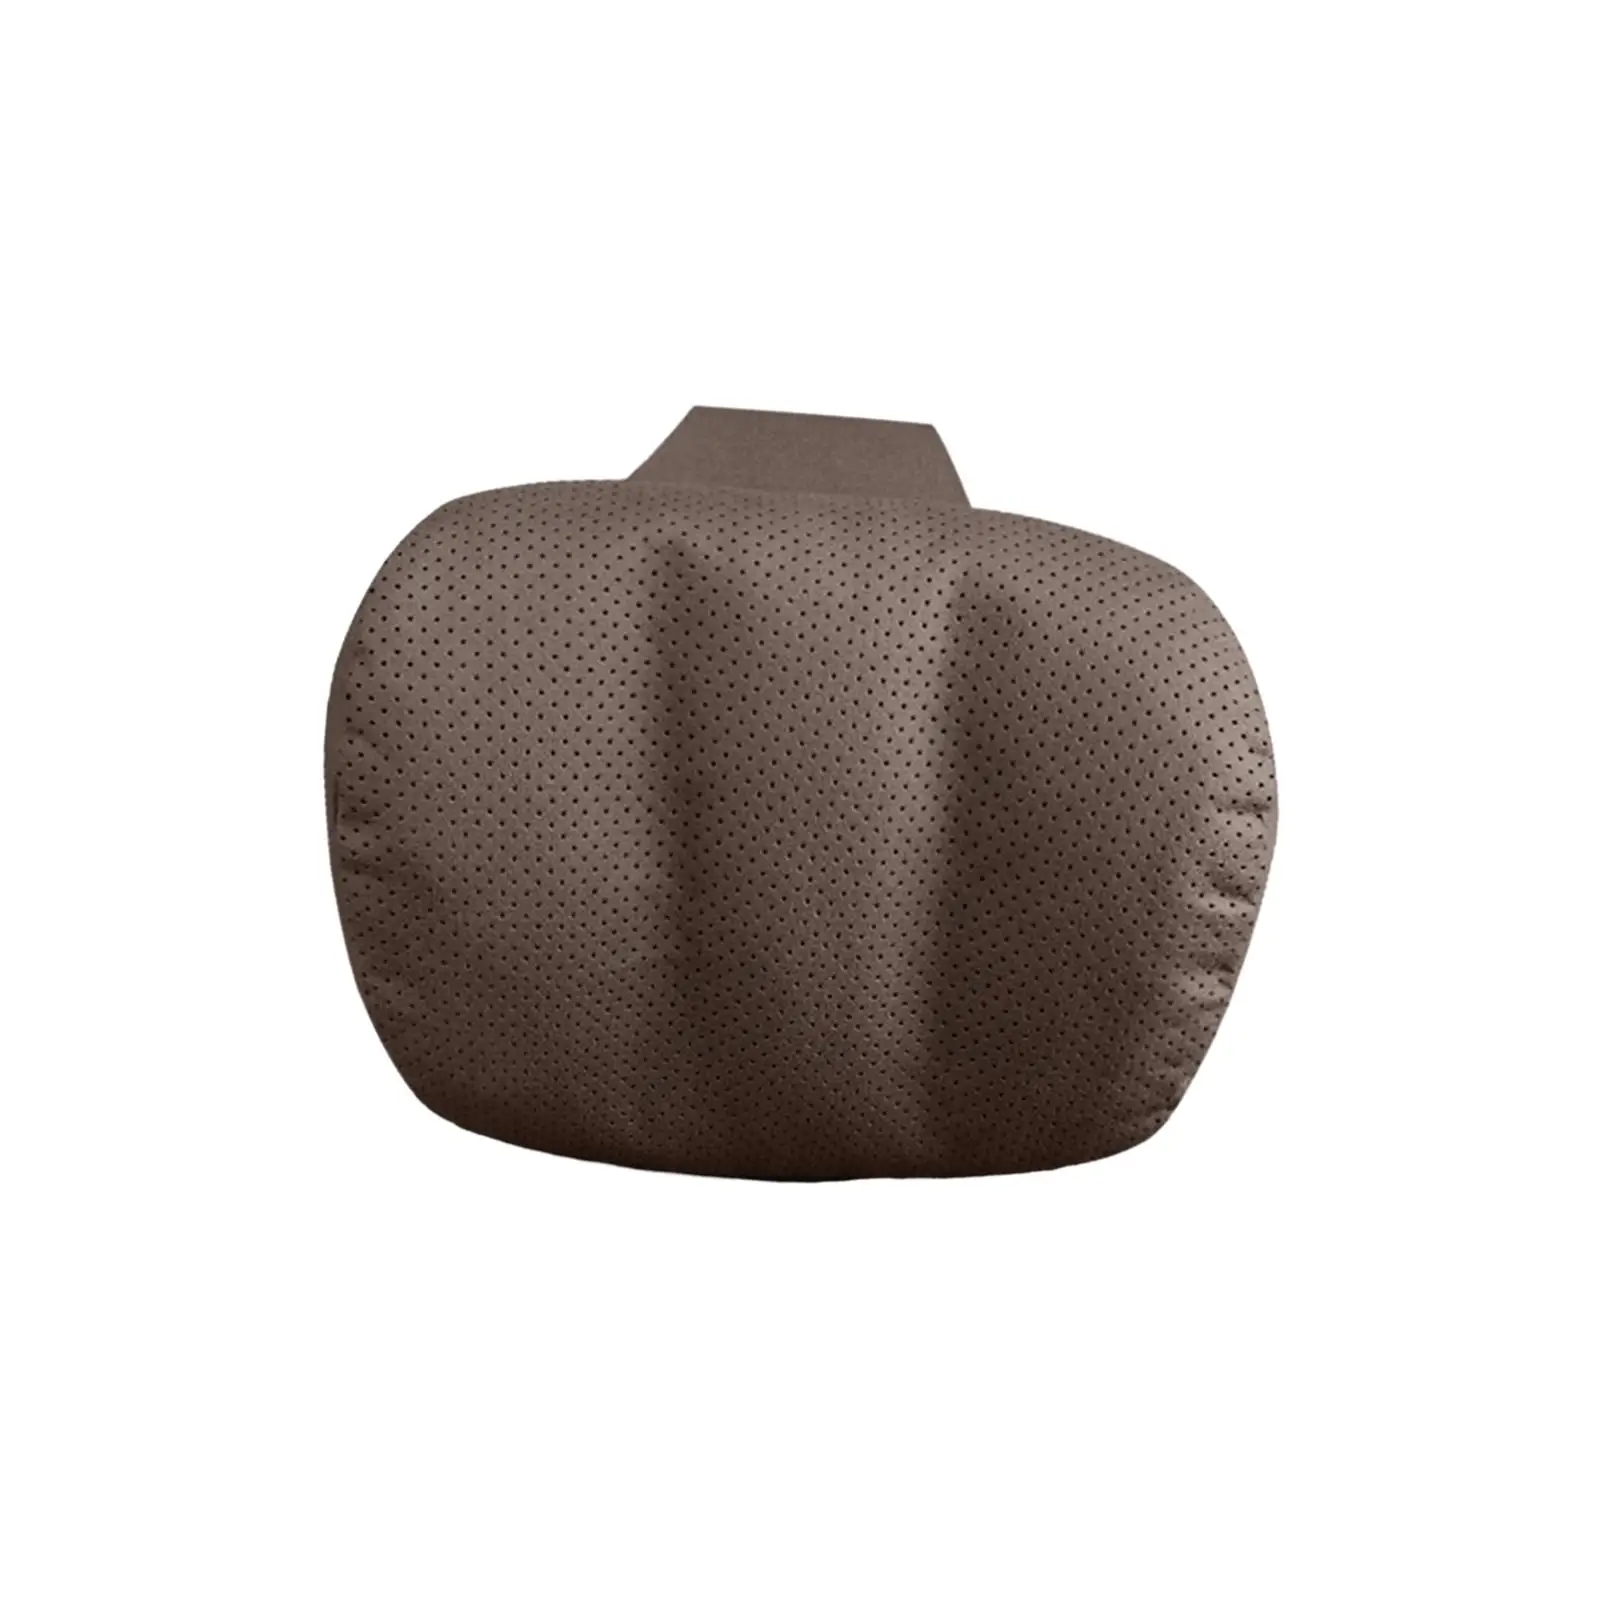 Head Rest Pillows Breathable Portable Comfortable Universal Car Headrest Pillow for Travel Driving Seat Home Office